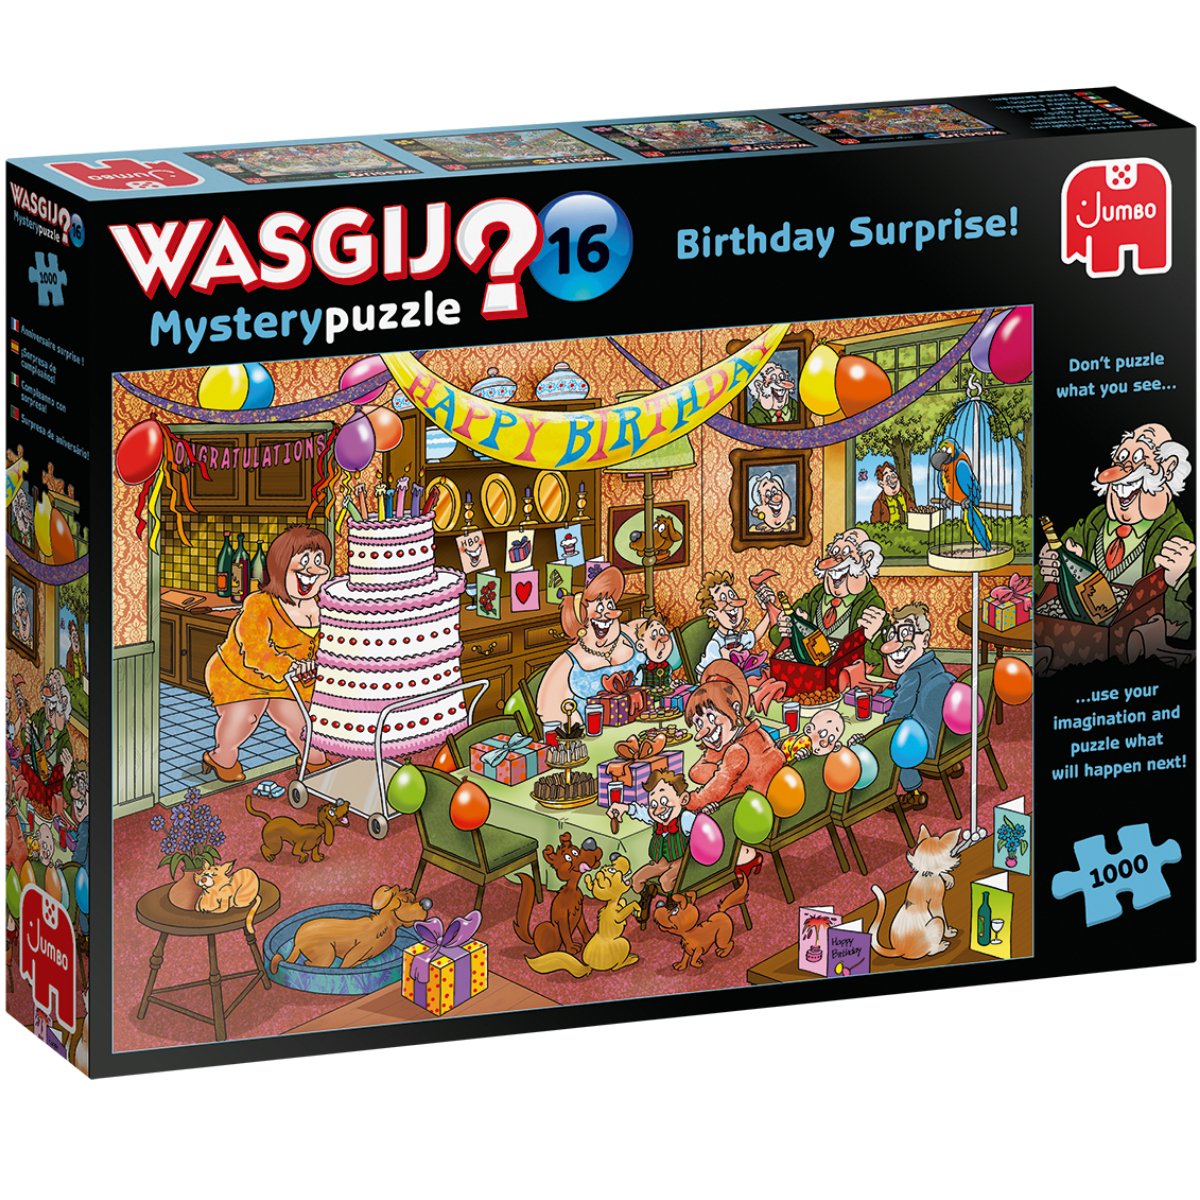 Wasgij Mystery 16 Birthday Surprise Jigsaw Puzzle (1000 Pieces) - Phillips Hobbies